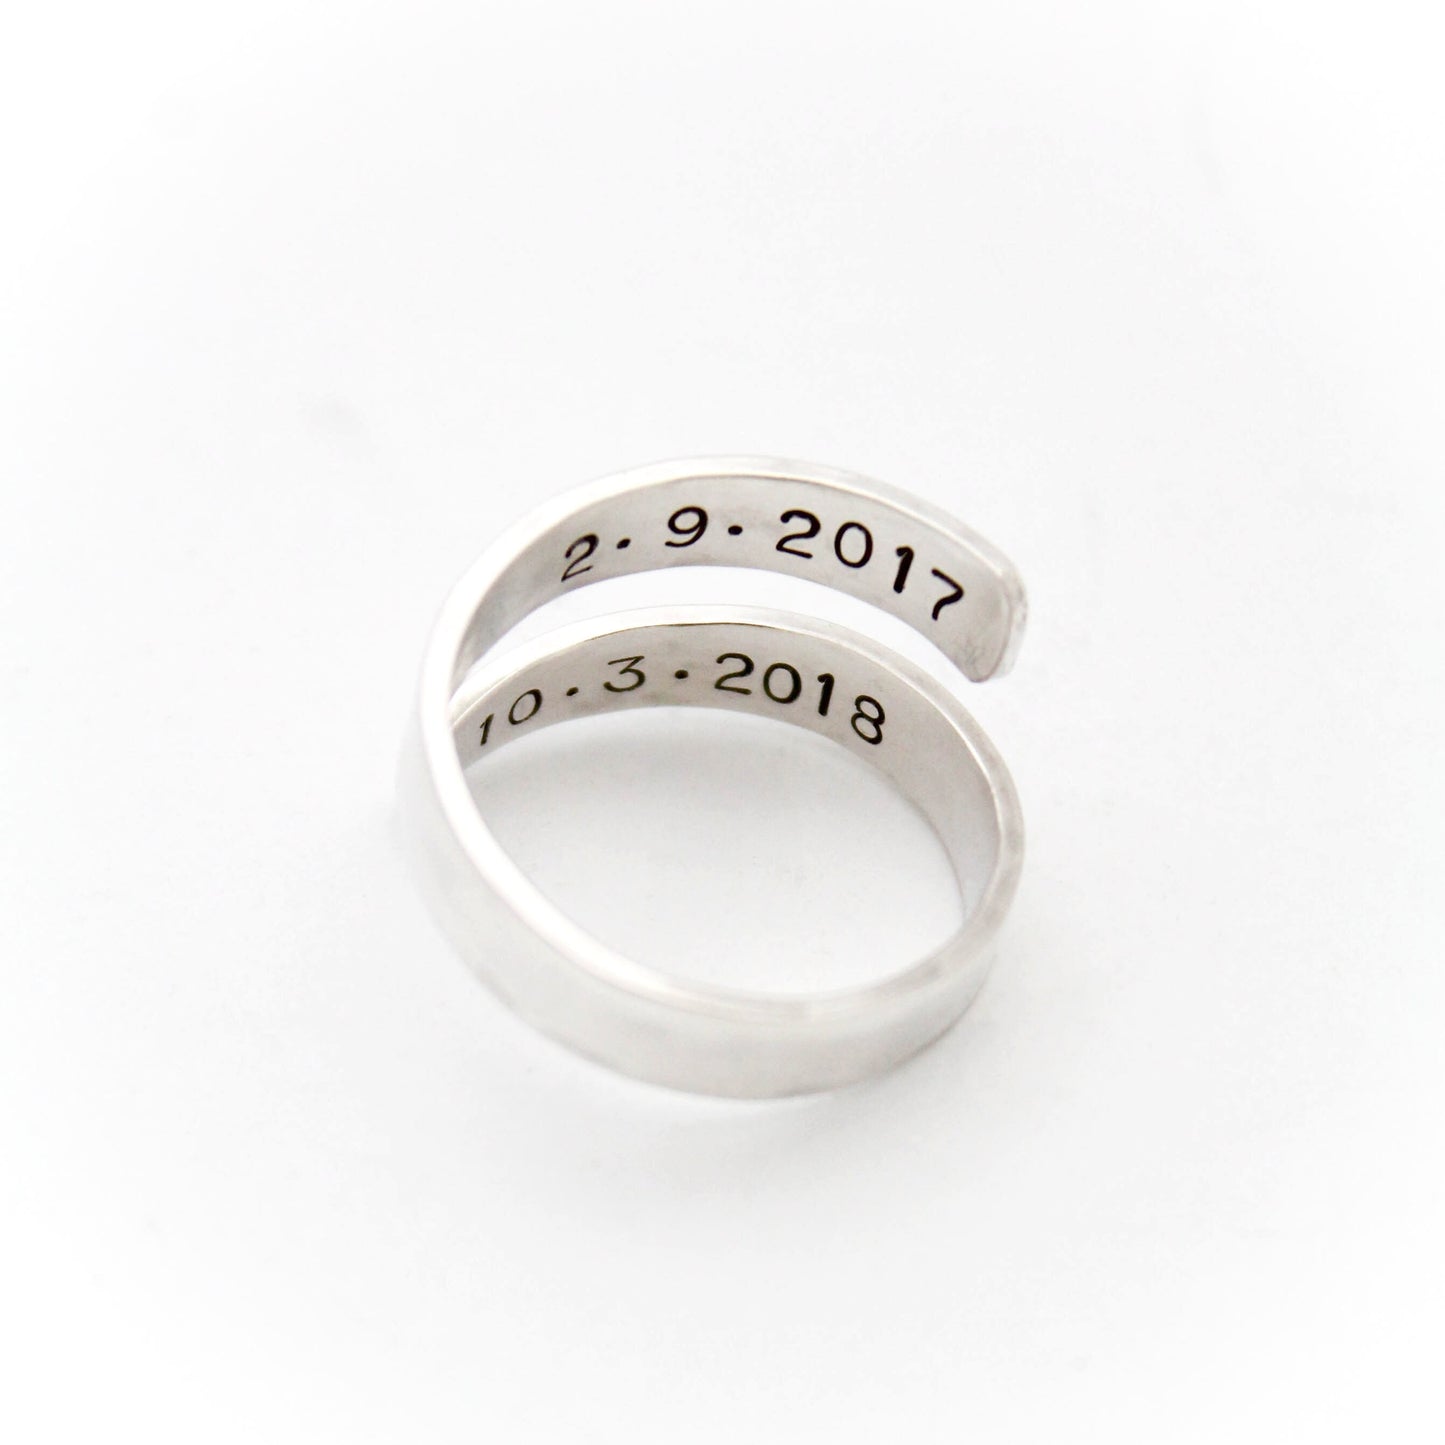 Personalized Wrap Ring, Silver Wrap Ring, Sterling Silver Wrap Ring, Personalized Ring, Gifts for Her, Customized Ring, Engraved Ring